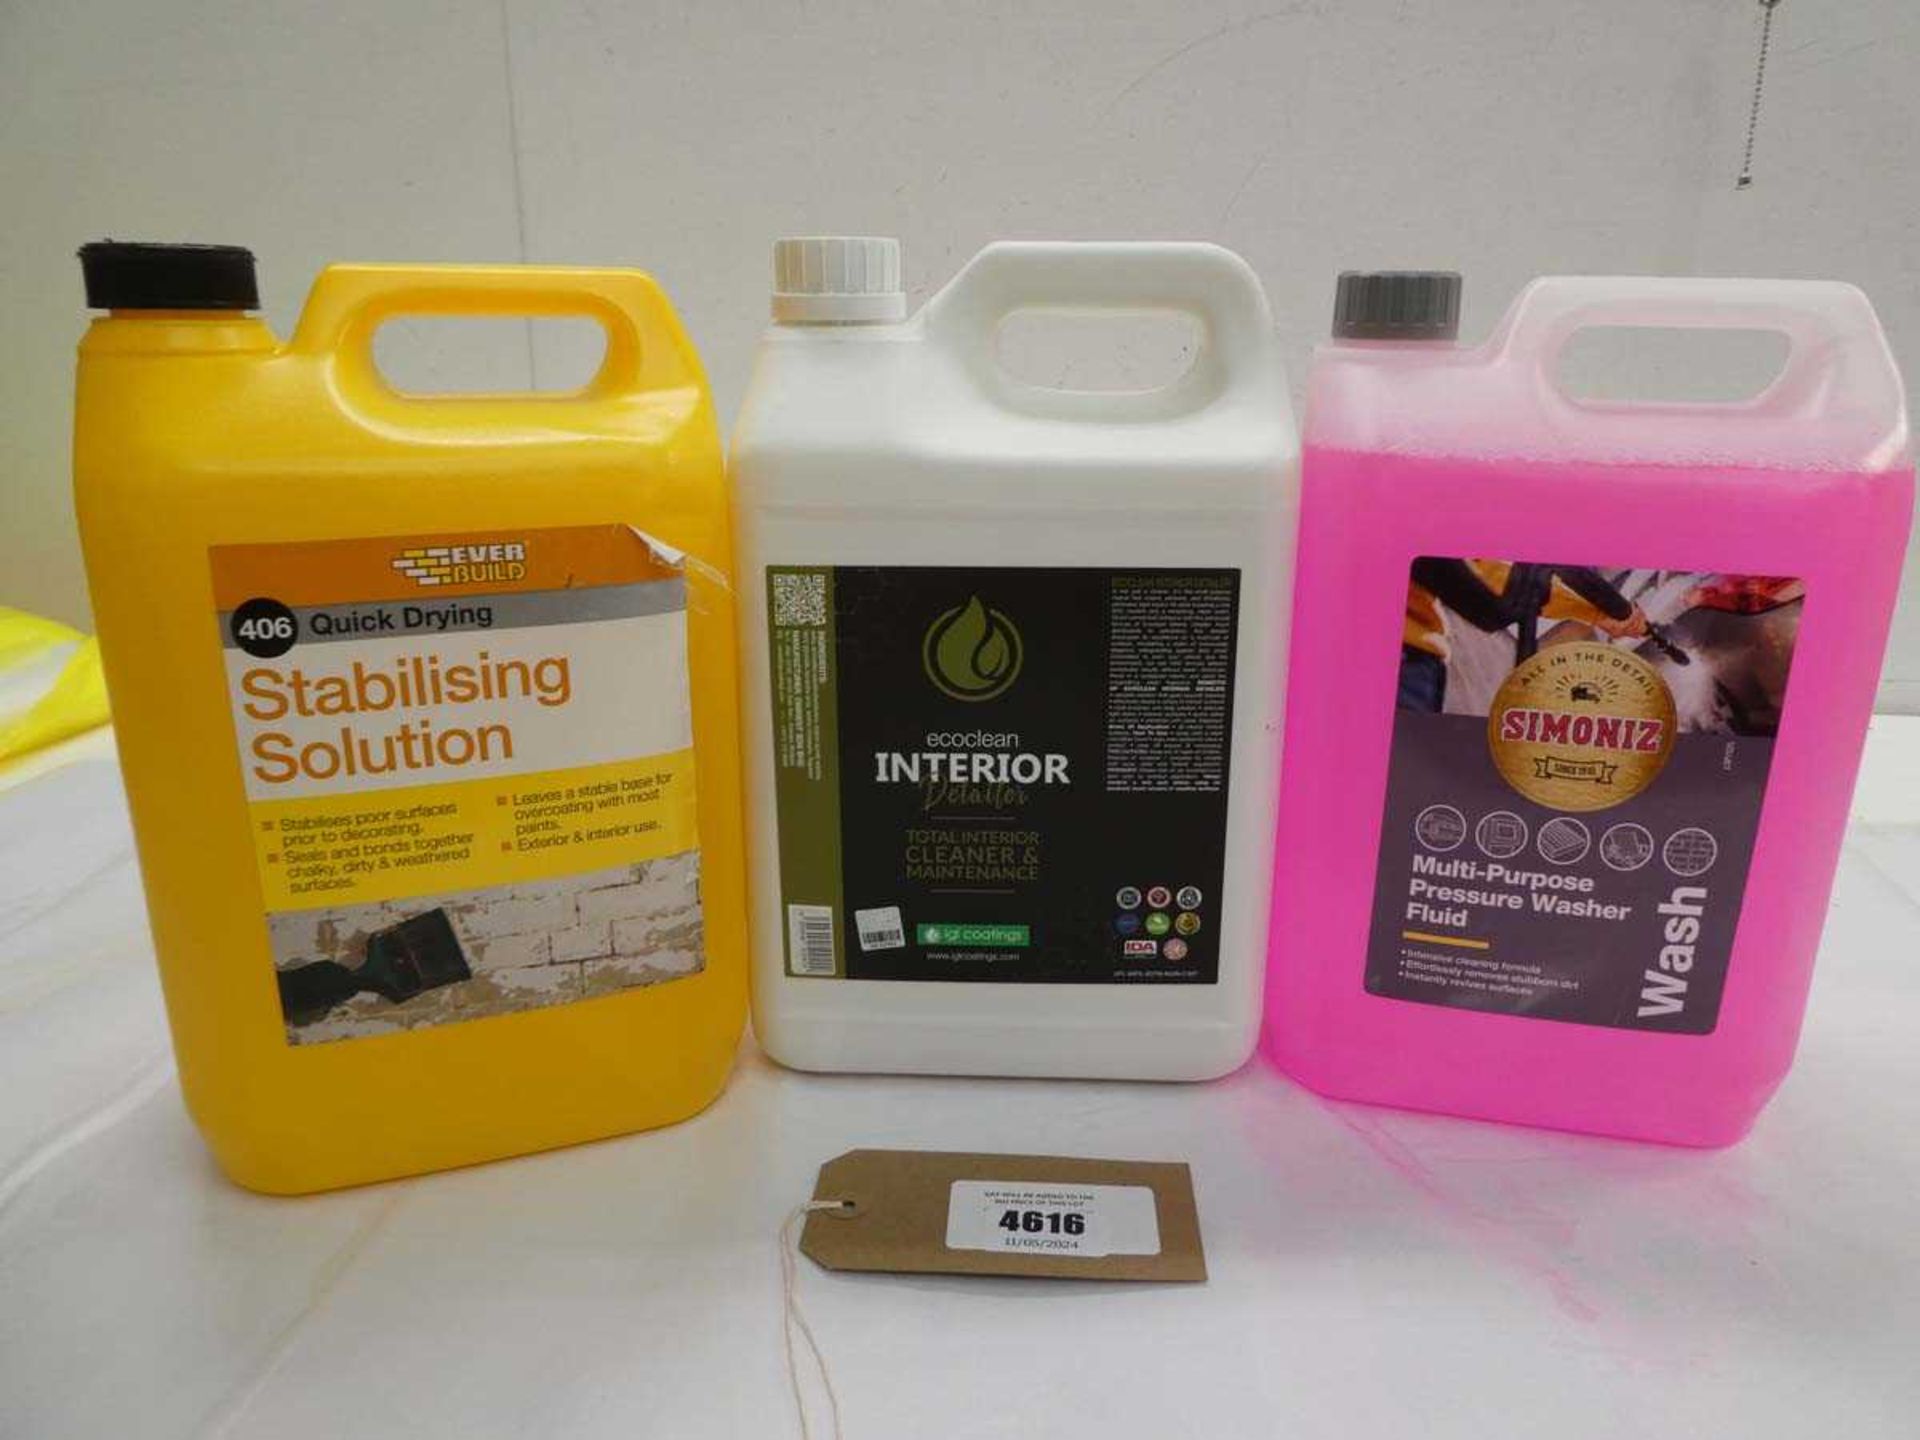 +VAT 5L containers of Pressure Washer fluid, Interior Detailer and Stabilising Solution